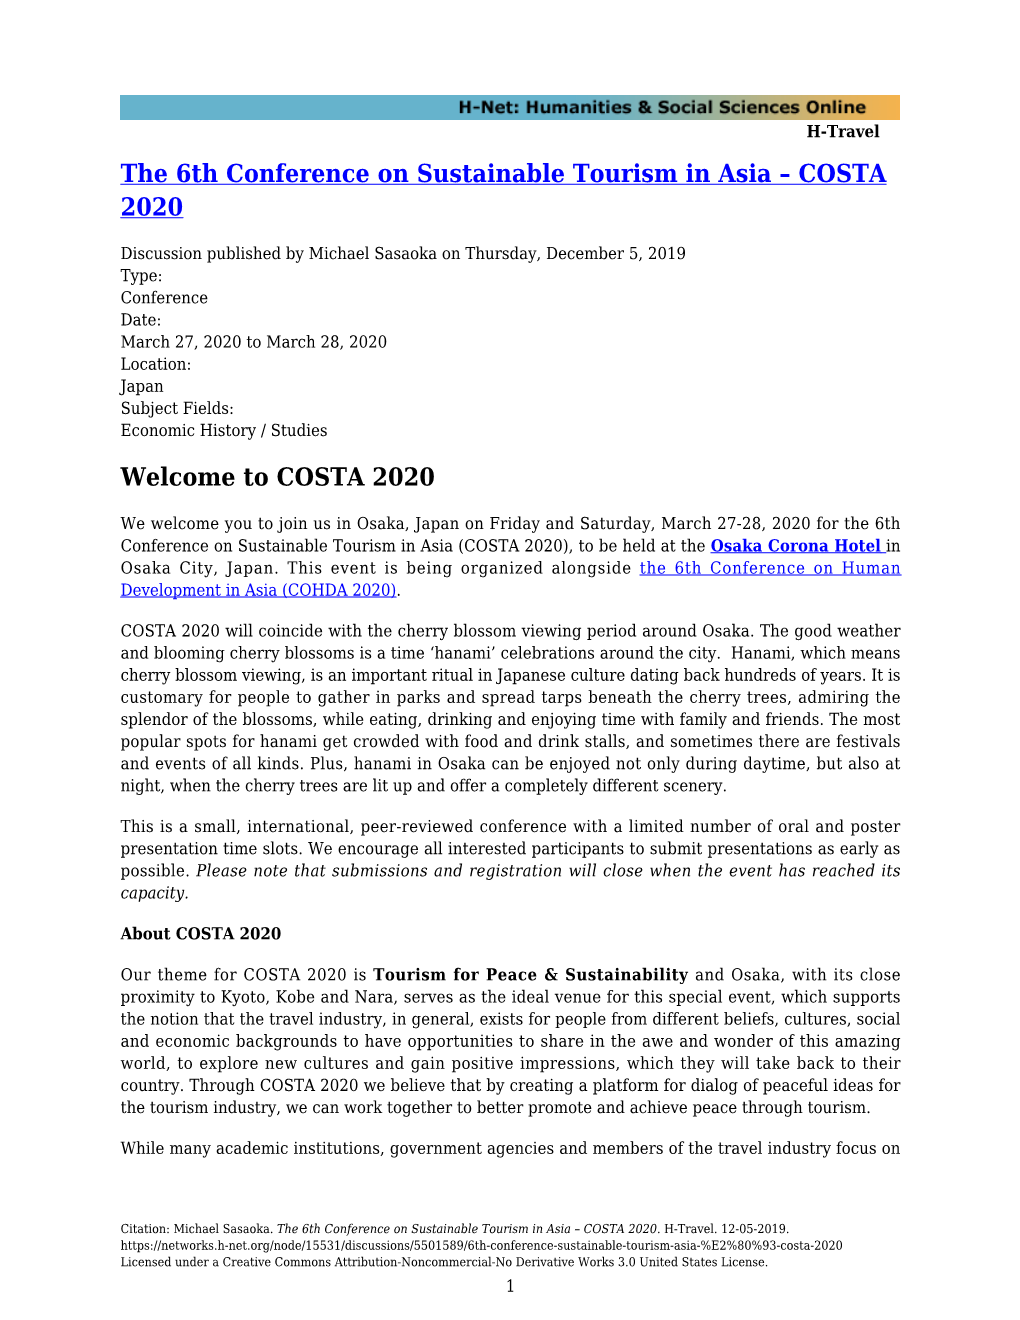 The 6Th Conference on Sustainable Tourism in Asia – COSTA 2020